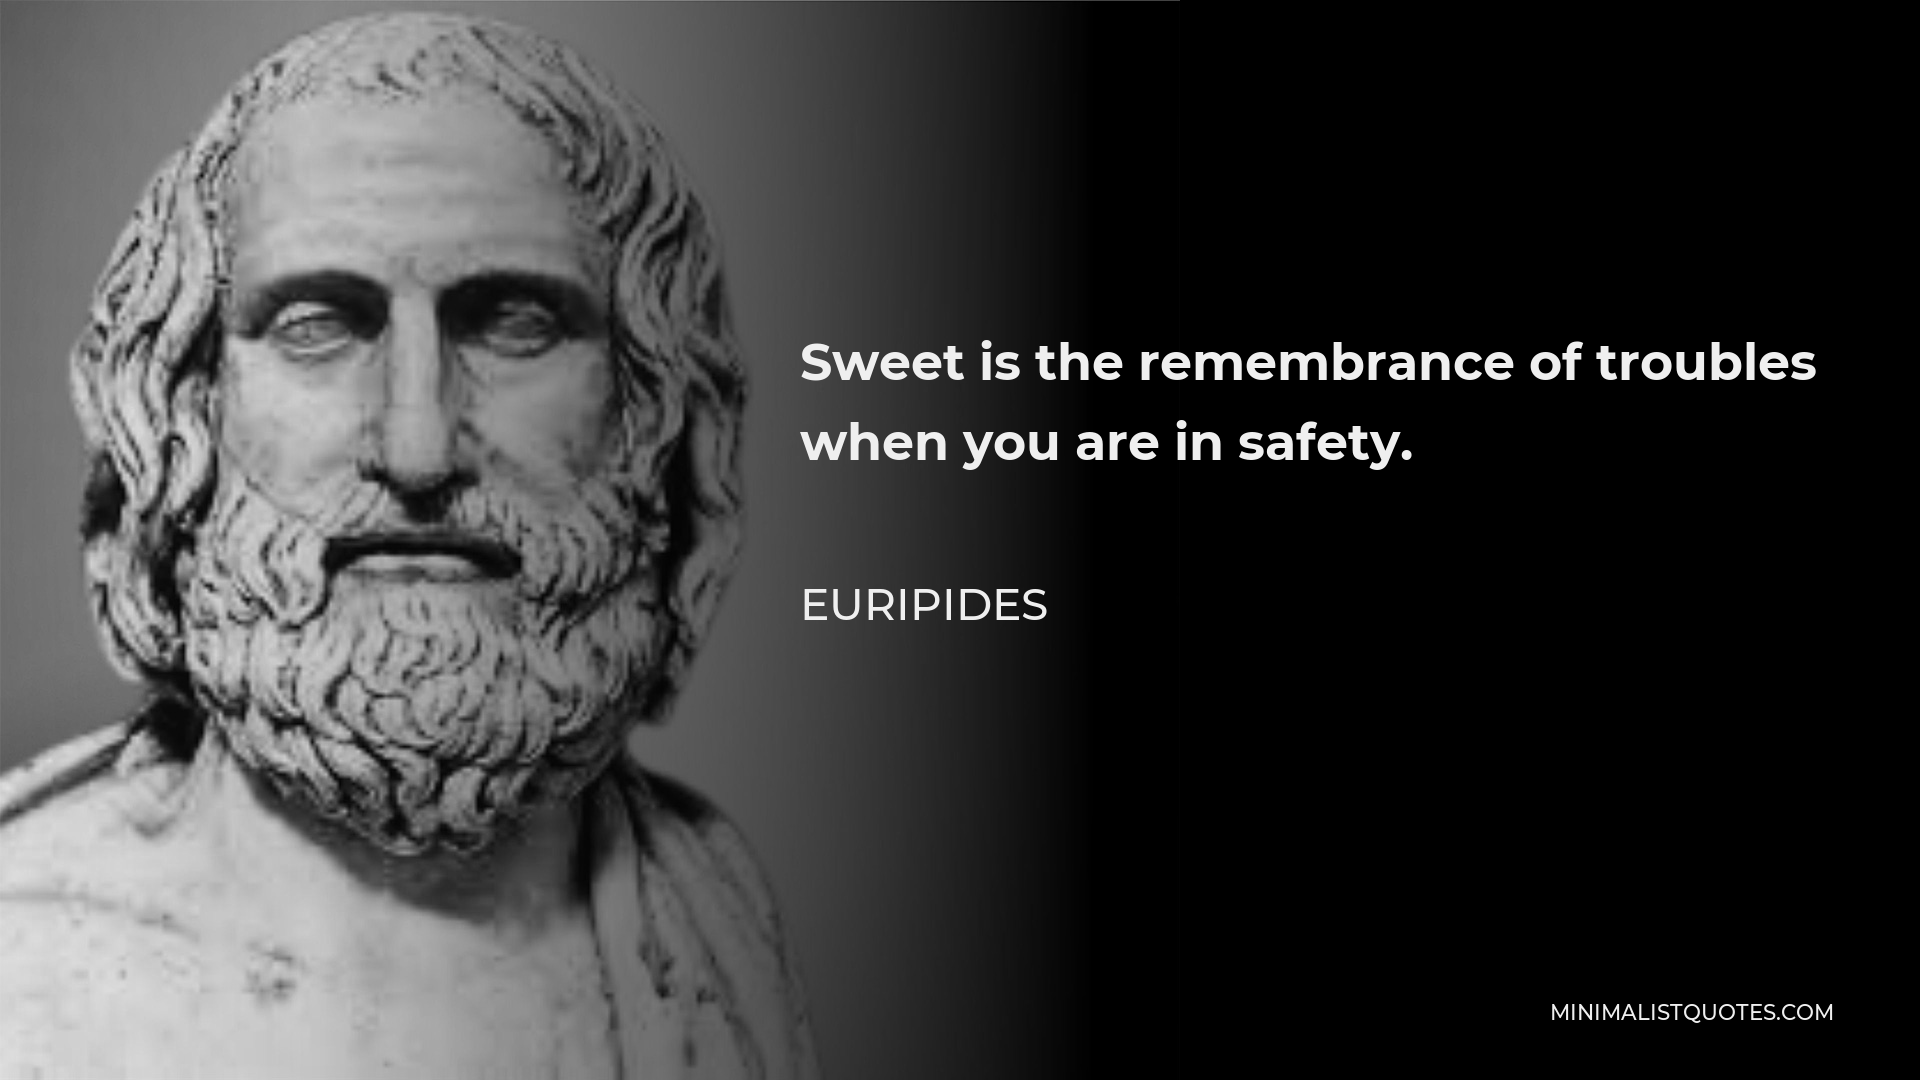 Euripides Quote - Sweet is the remembrance of troubles when you are in safety.